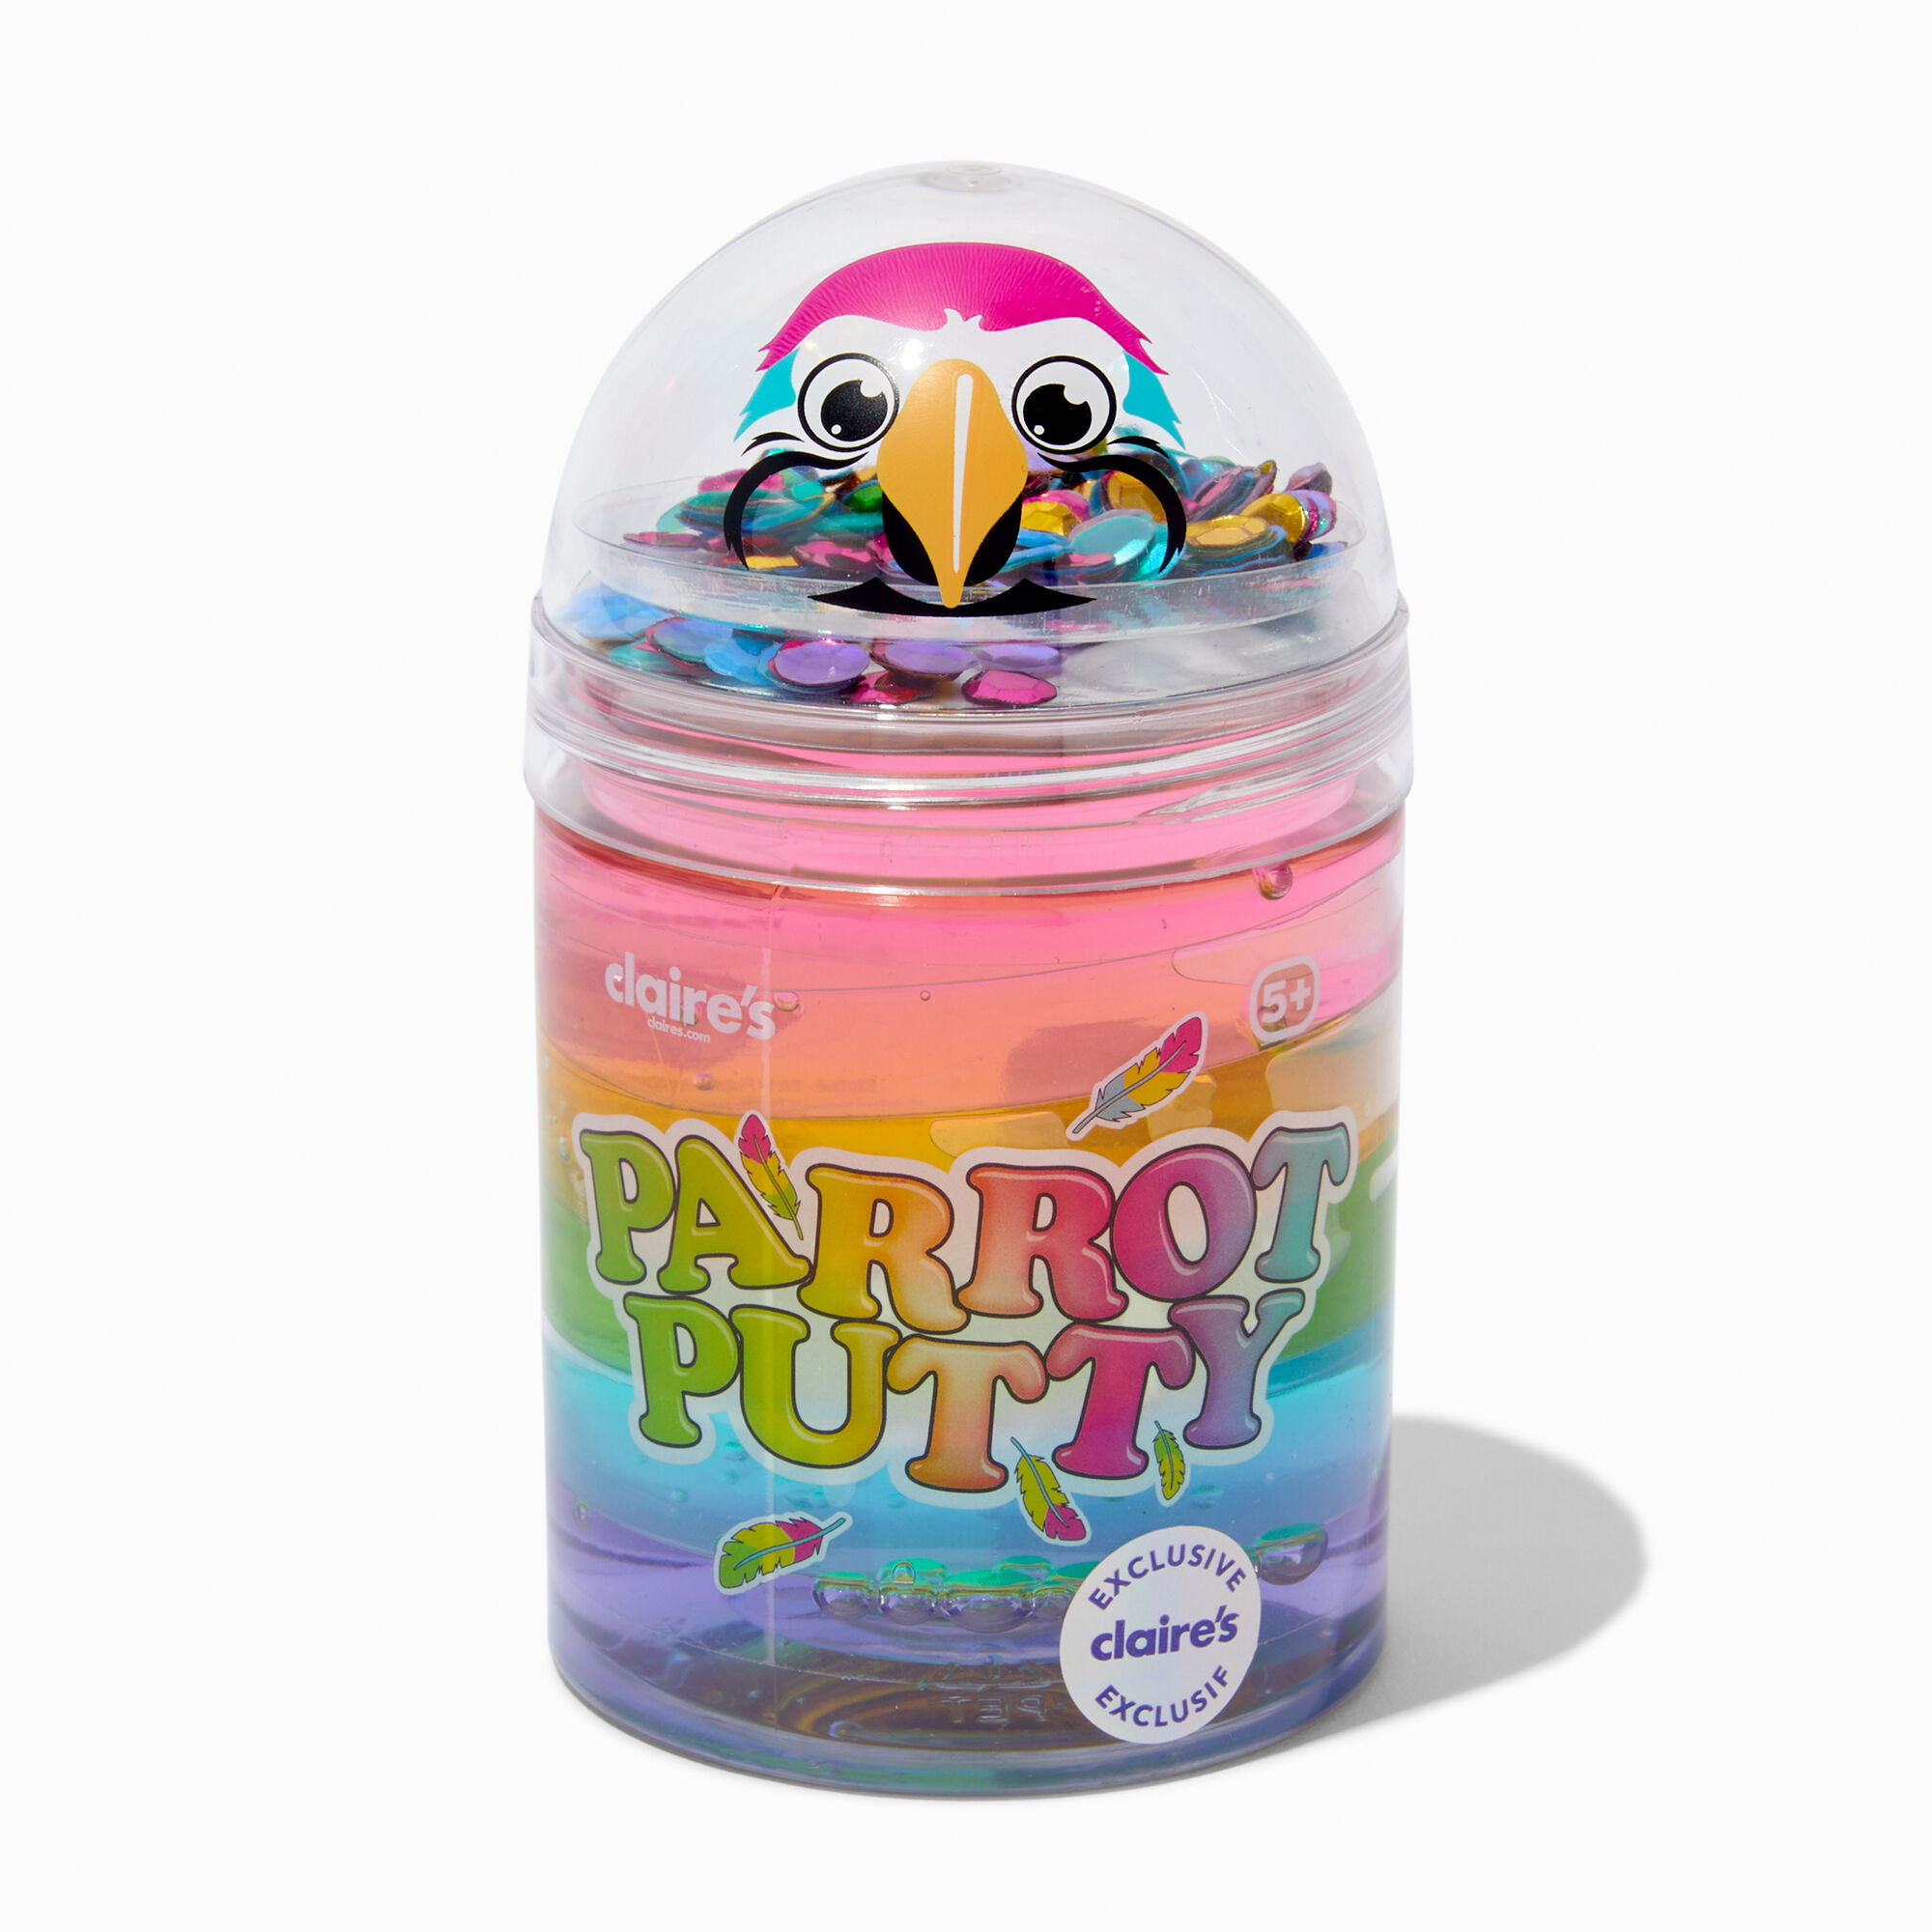 View Parrot Claires Exclusive Putty Pot Rainbow information